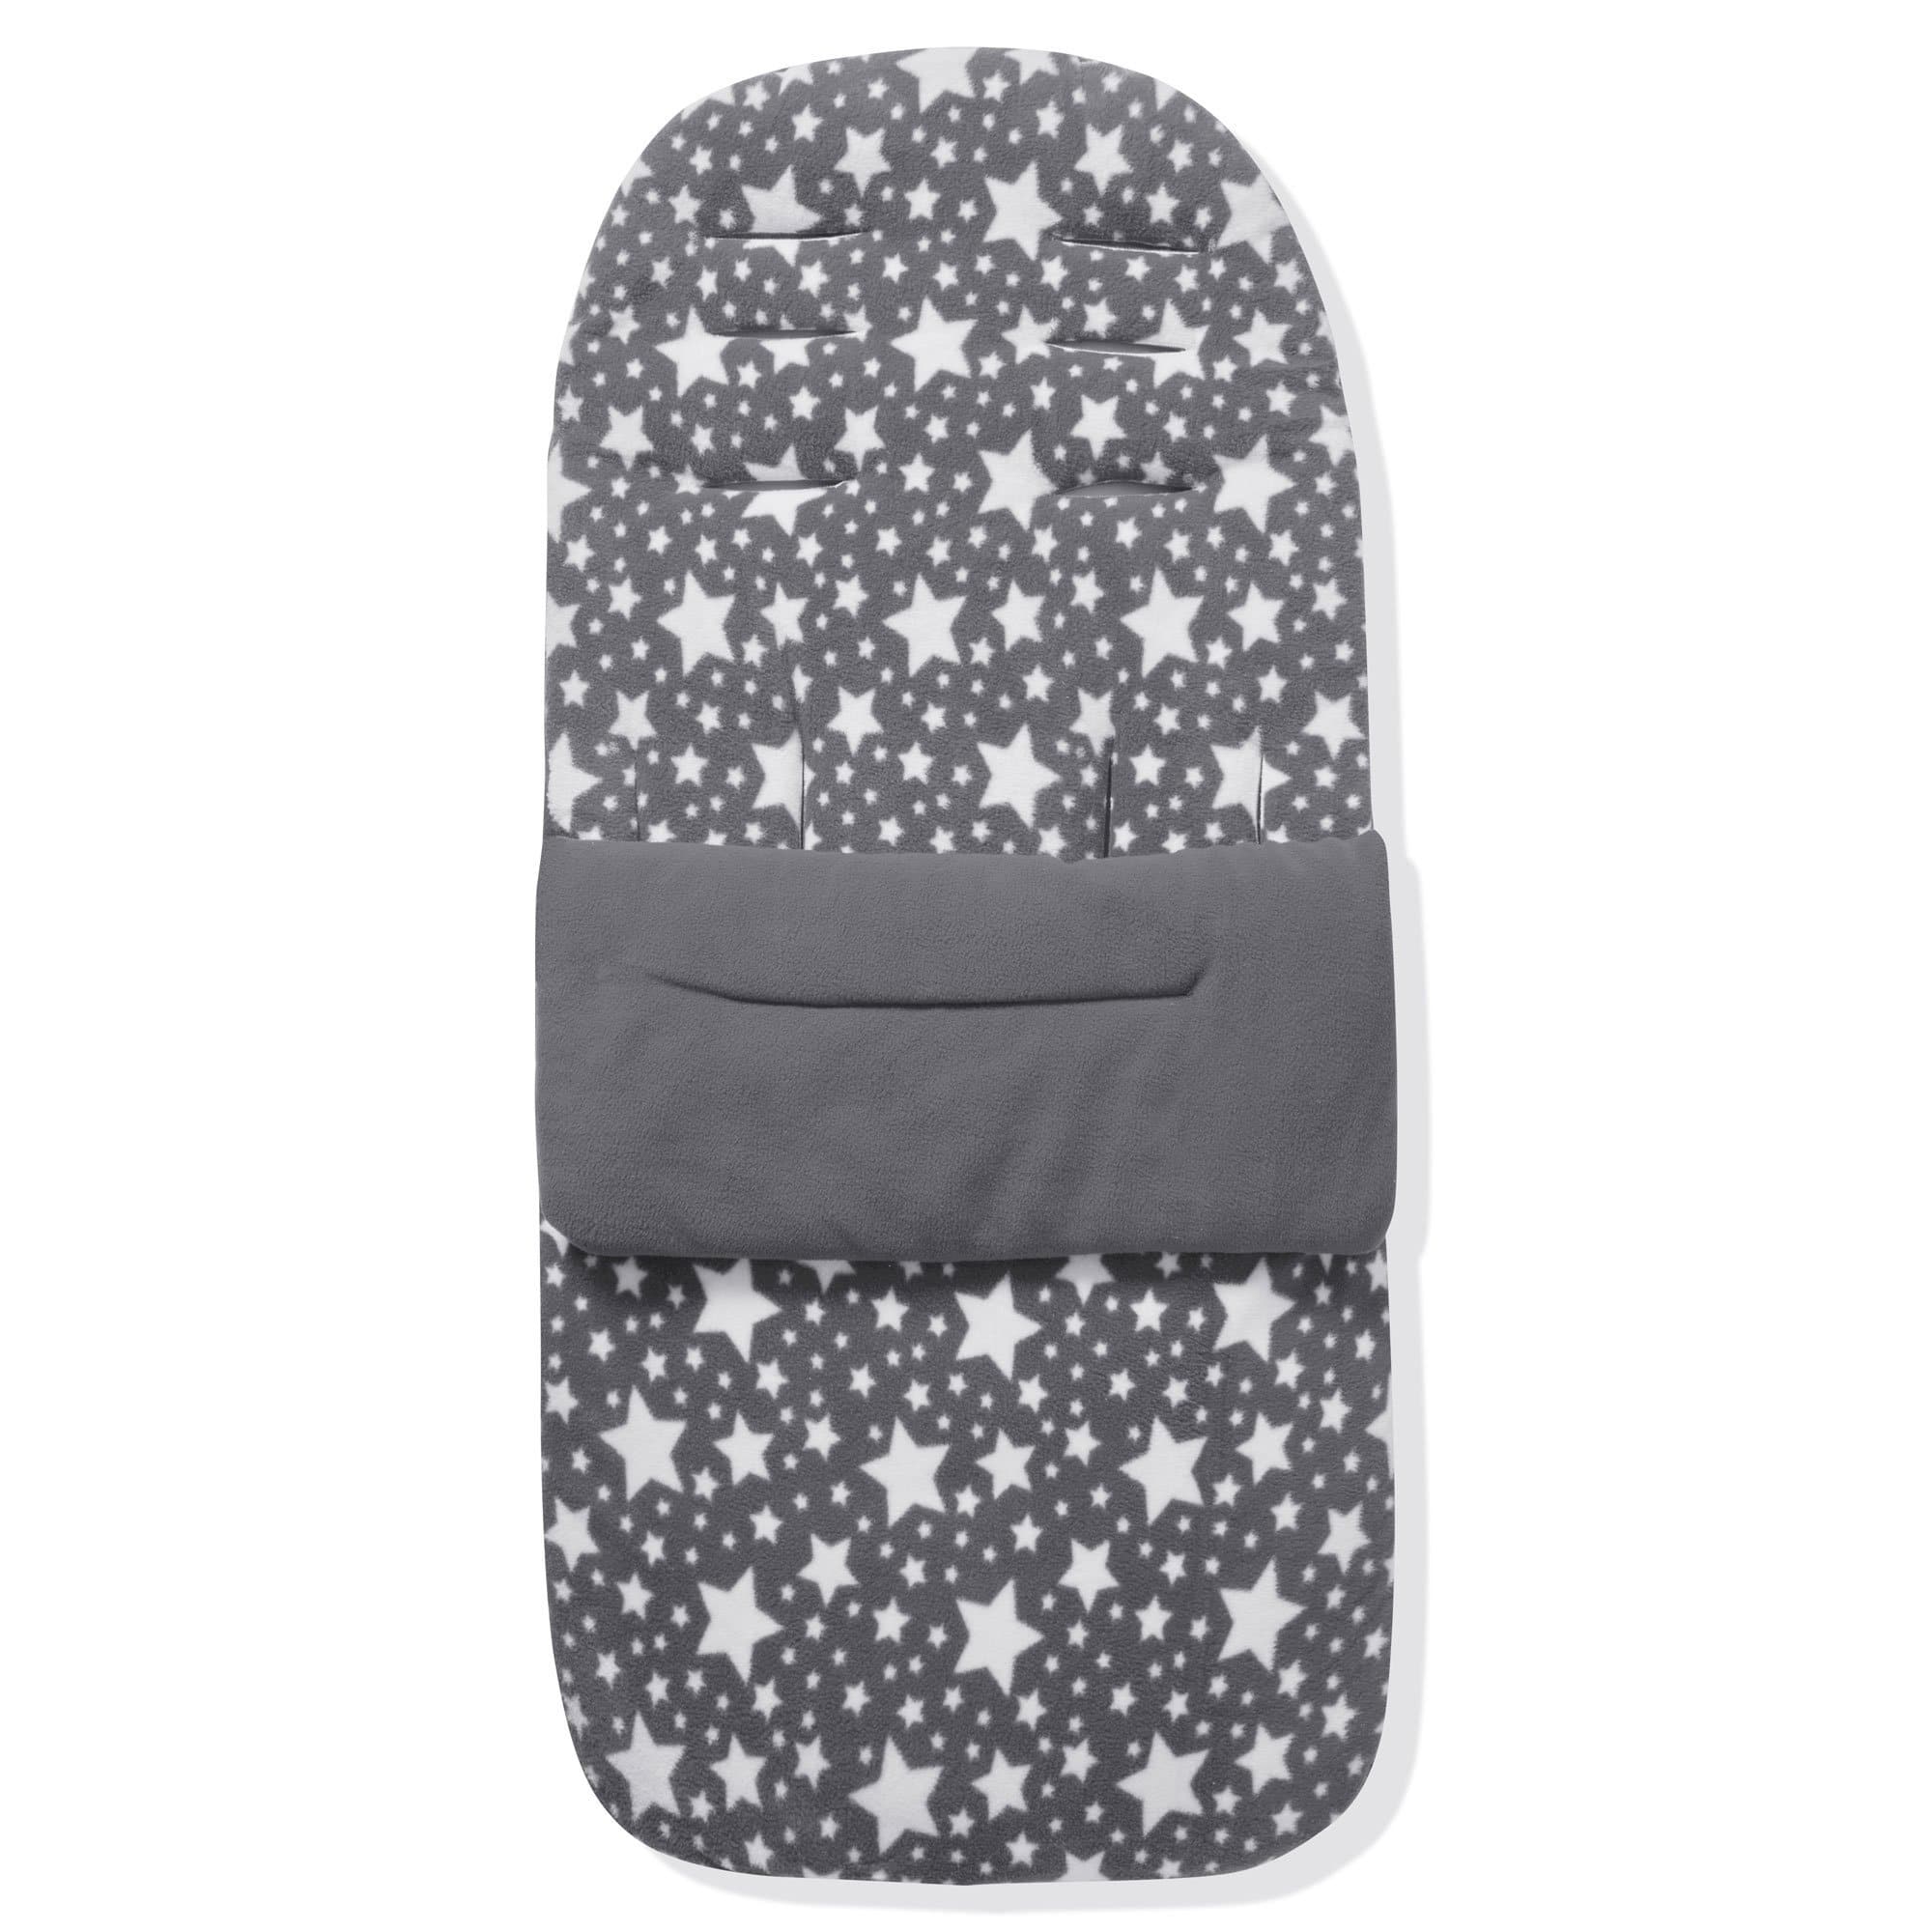 Fleece Footmuff / Cosy Toes Compatible with Maxi Cosi - For Your Little One